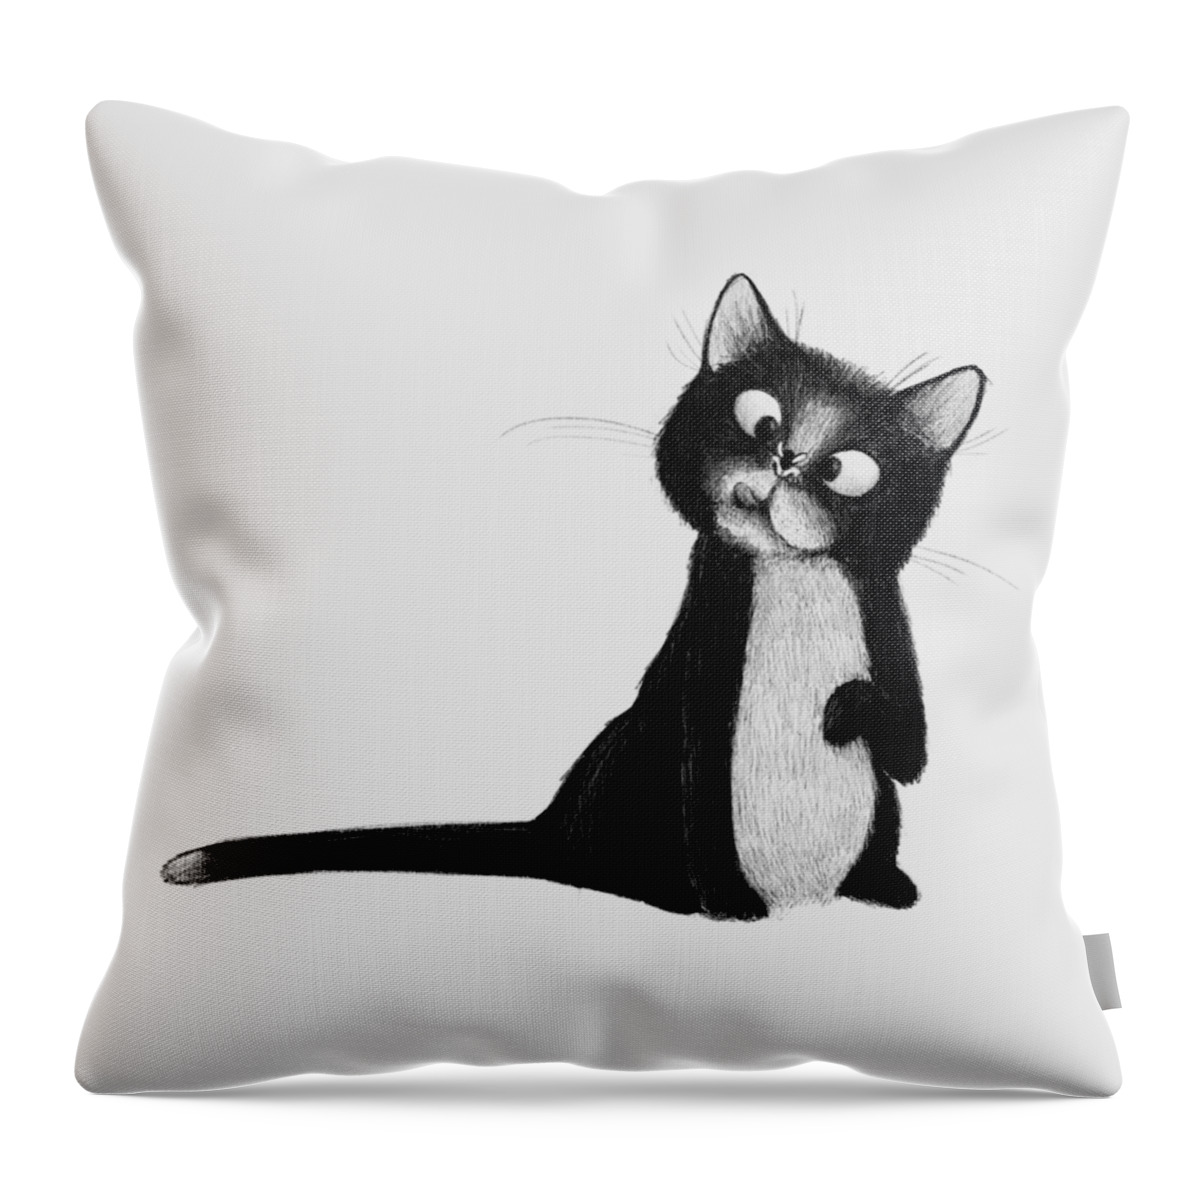 Cat Throw Pillow featuring the digital art Fly on Cat by Michael Ciccotello